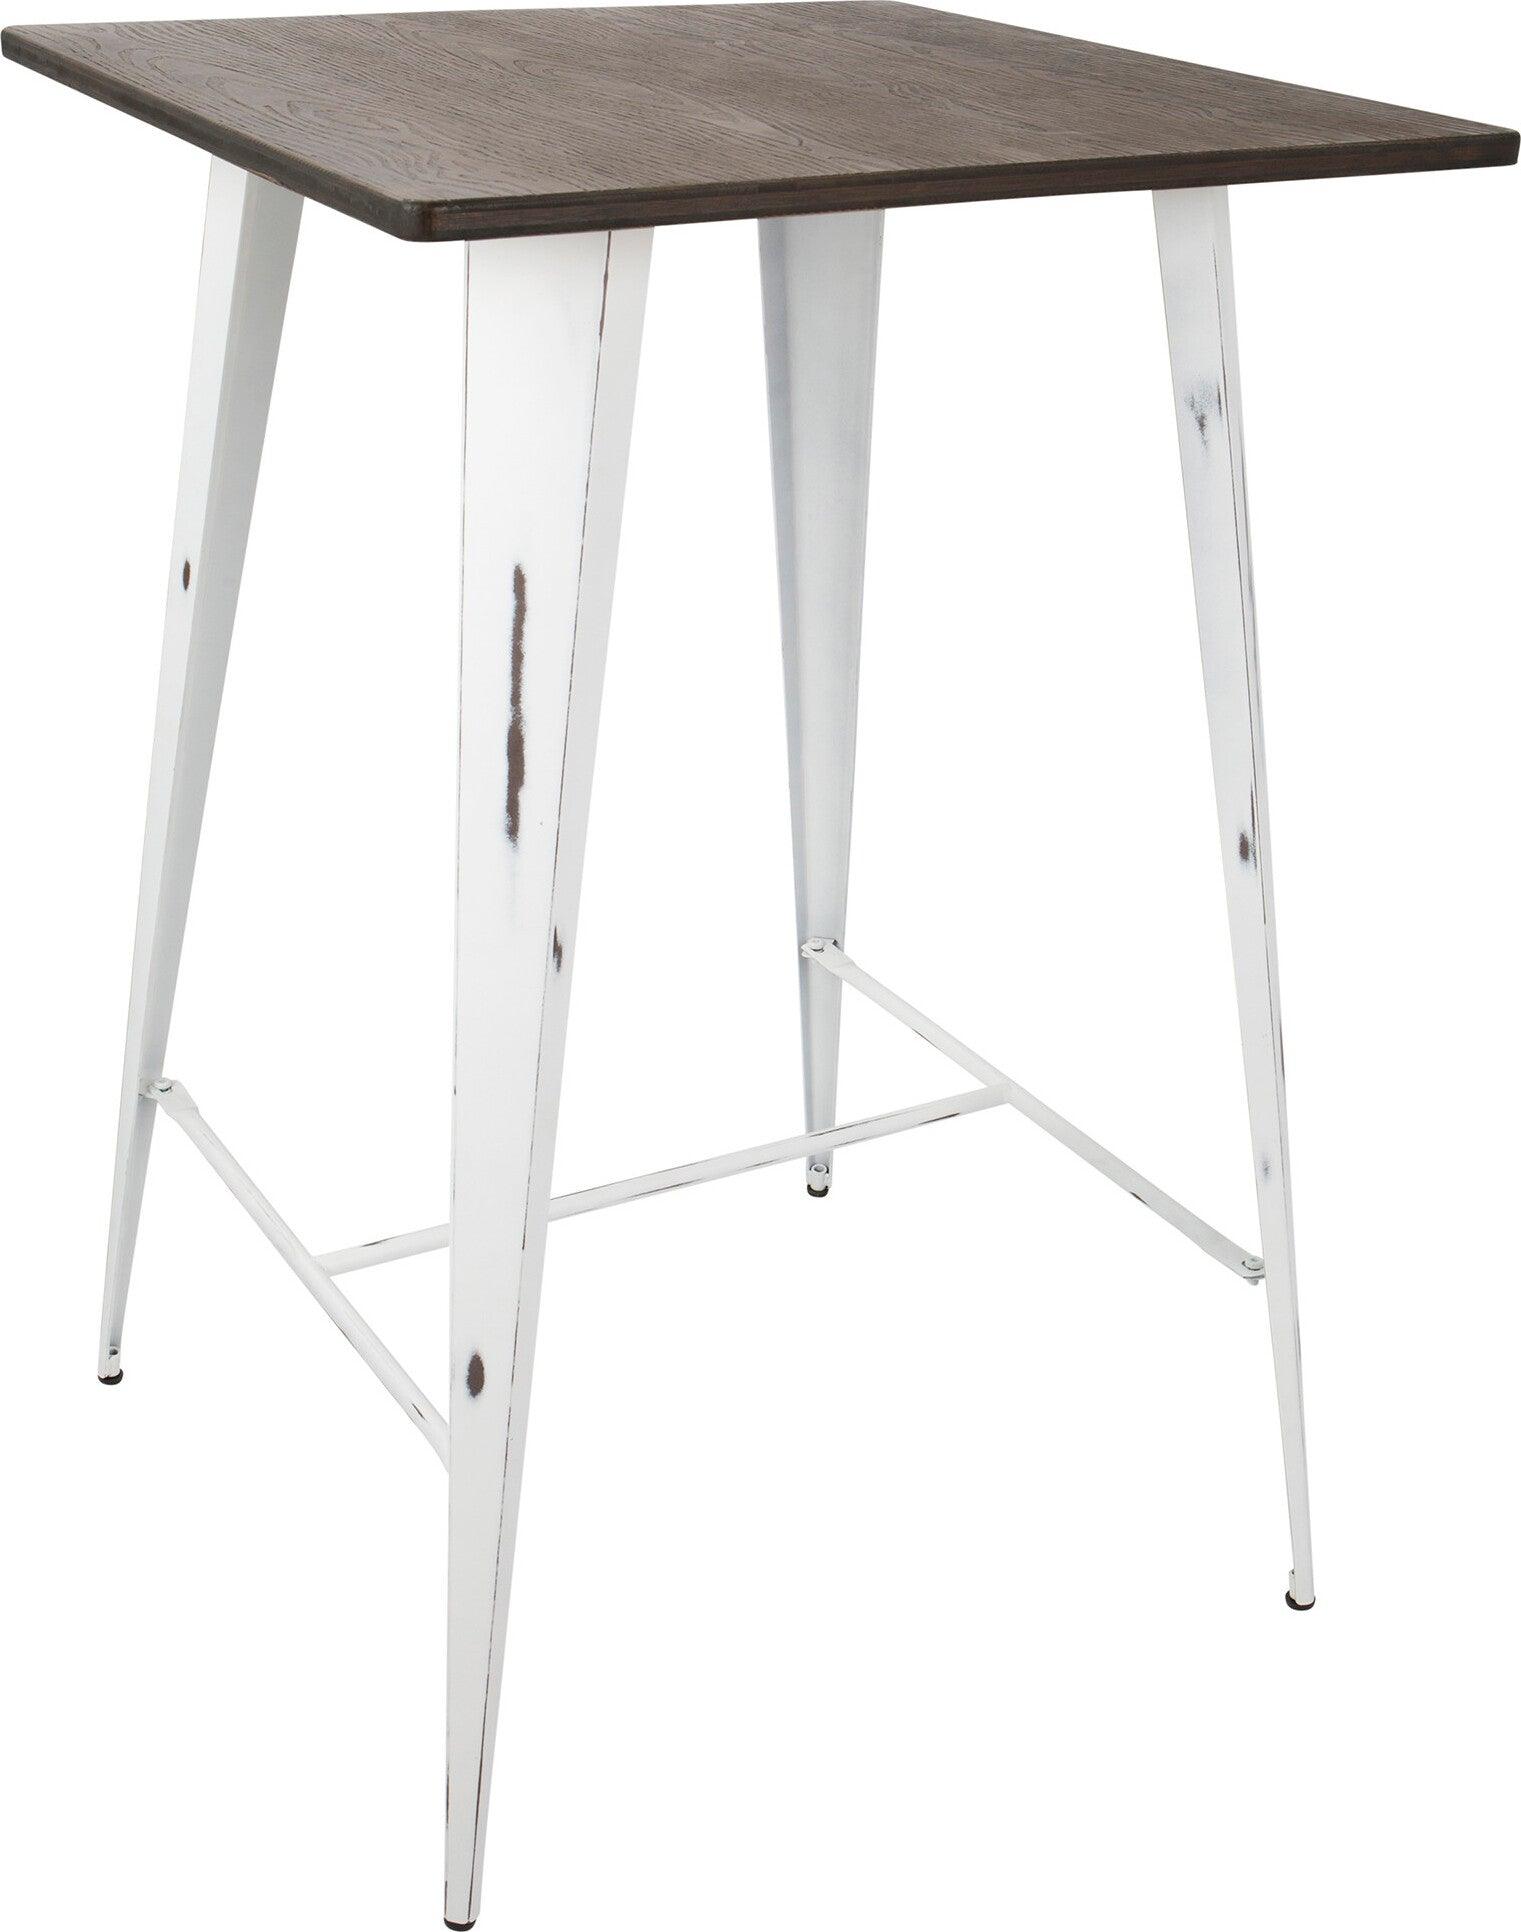 Lumisource Bar Tables - Oregon Industrial Table in Vintage White and Espresso LumiSource